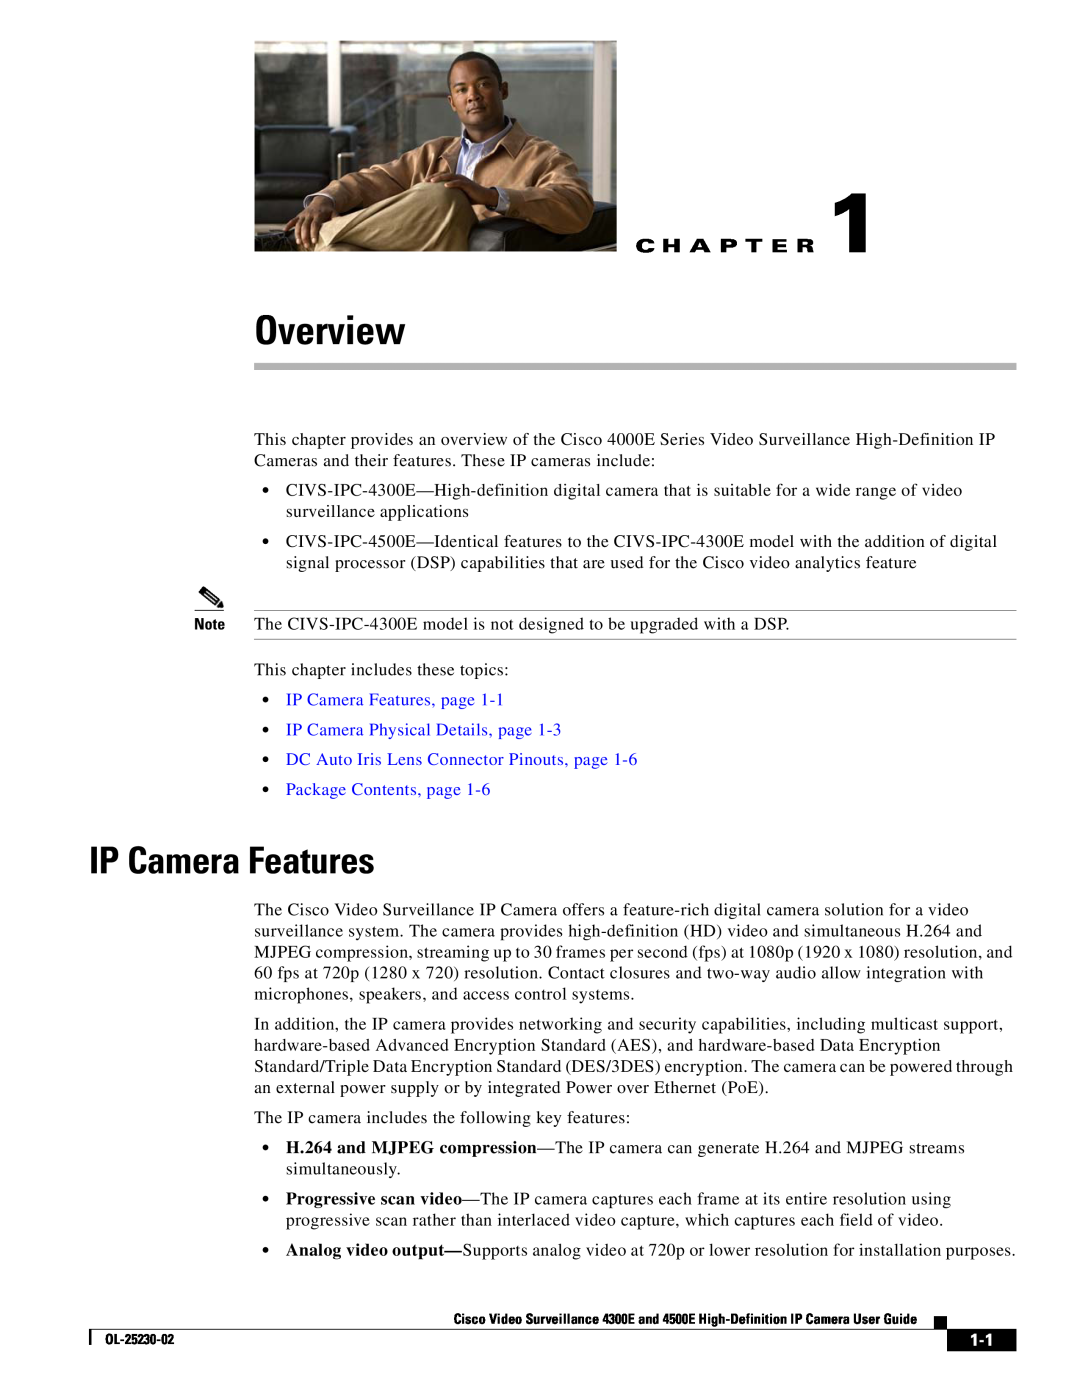 Cisco Systems 4300E manual Overview, C H A P T E R, IP Camera Features, page, IP Camera Physical Details, page 